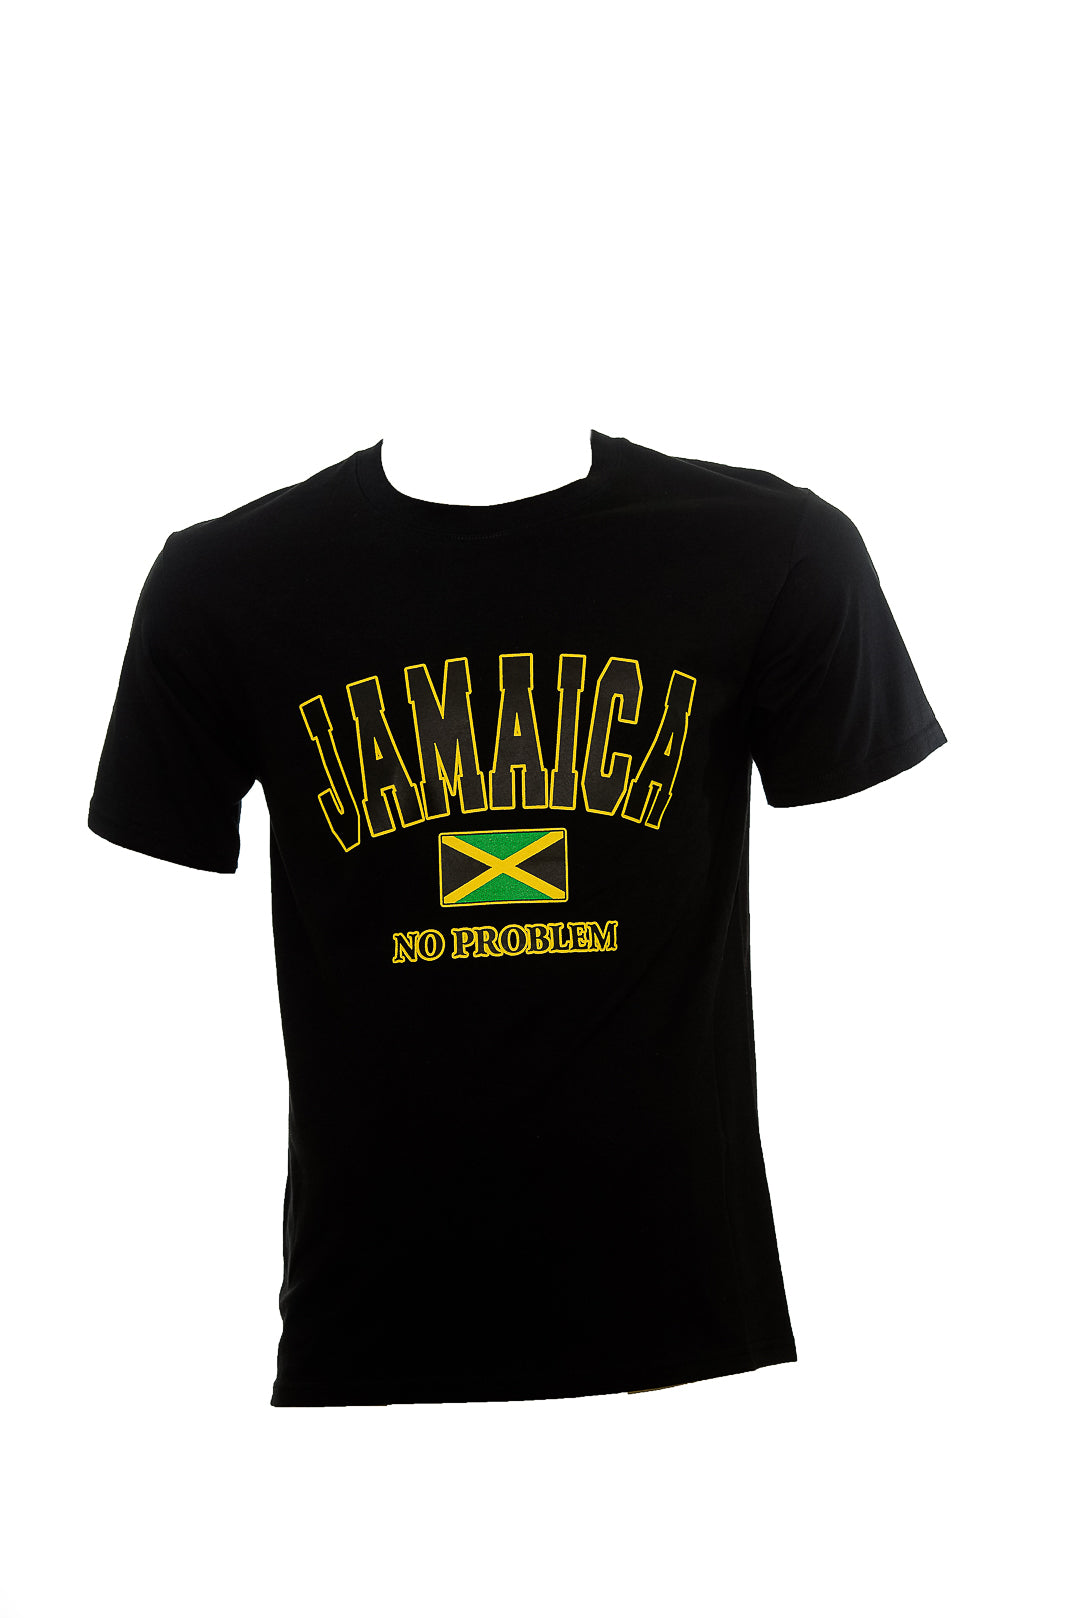 Exclusive Jamaican T shirts